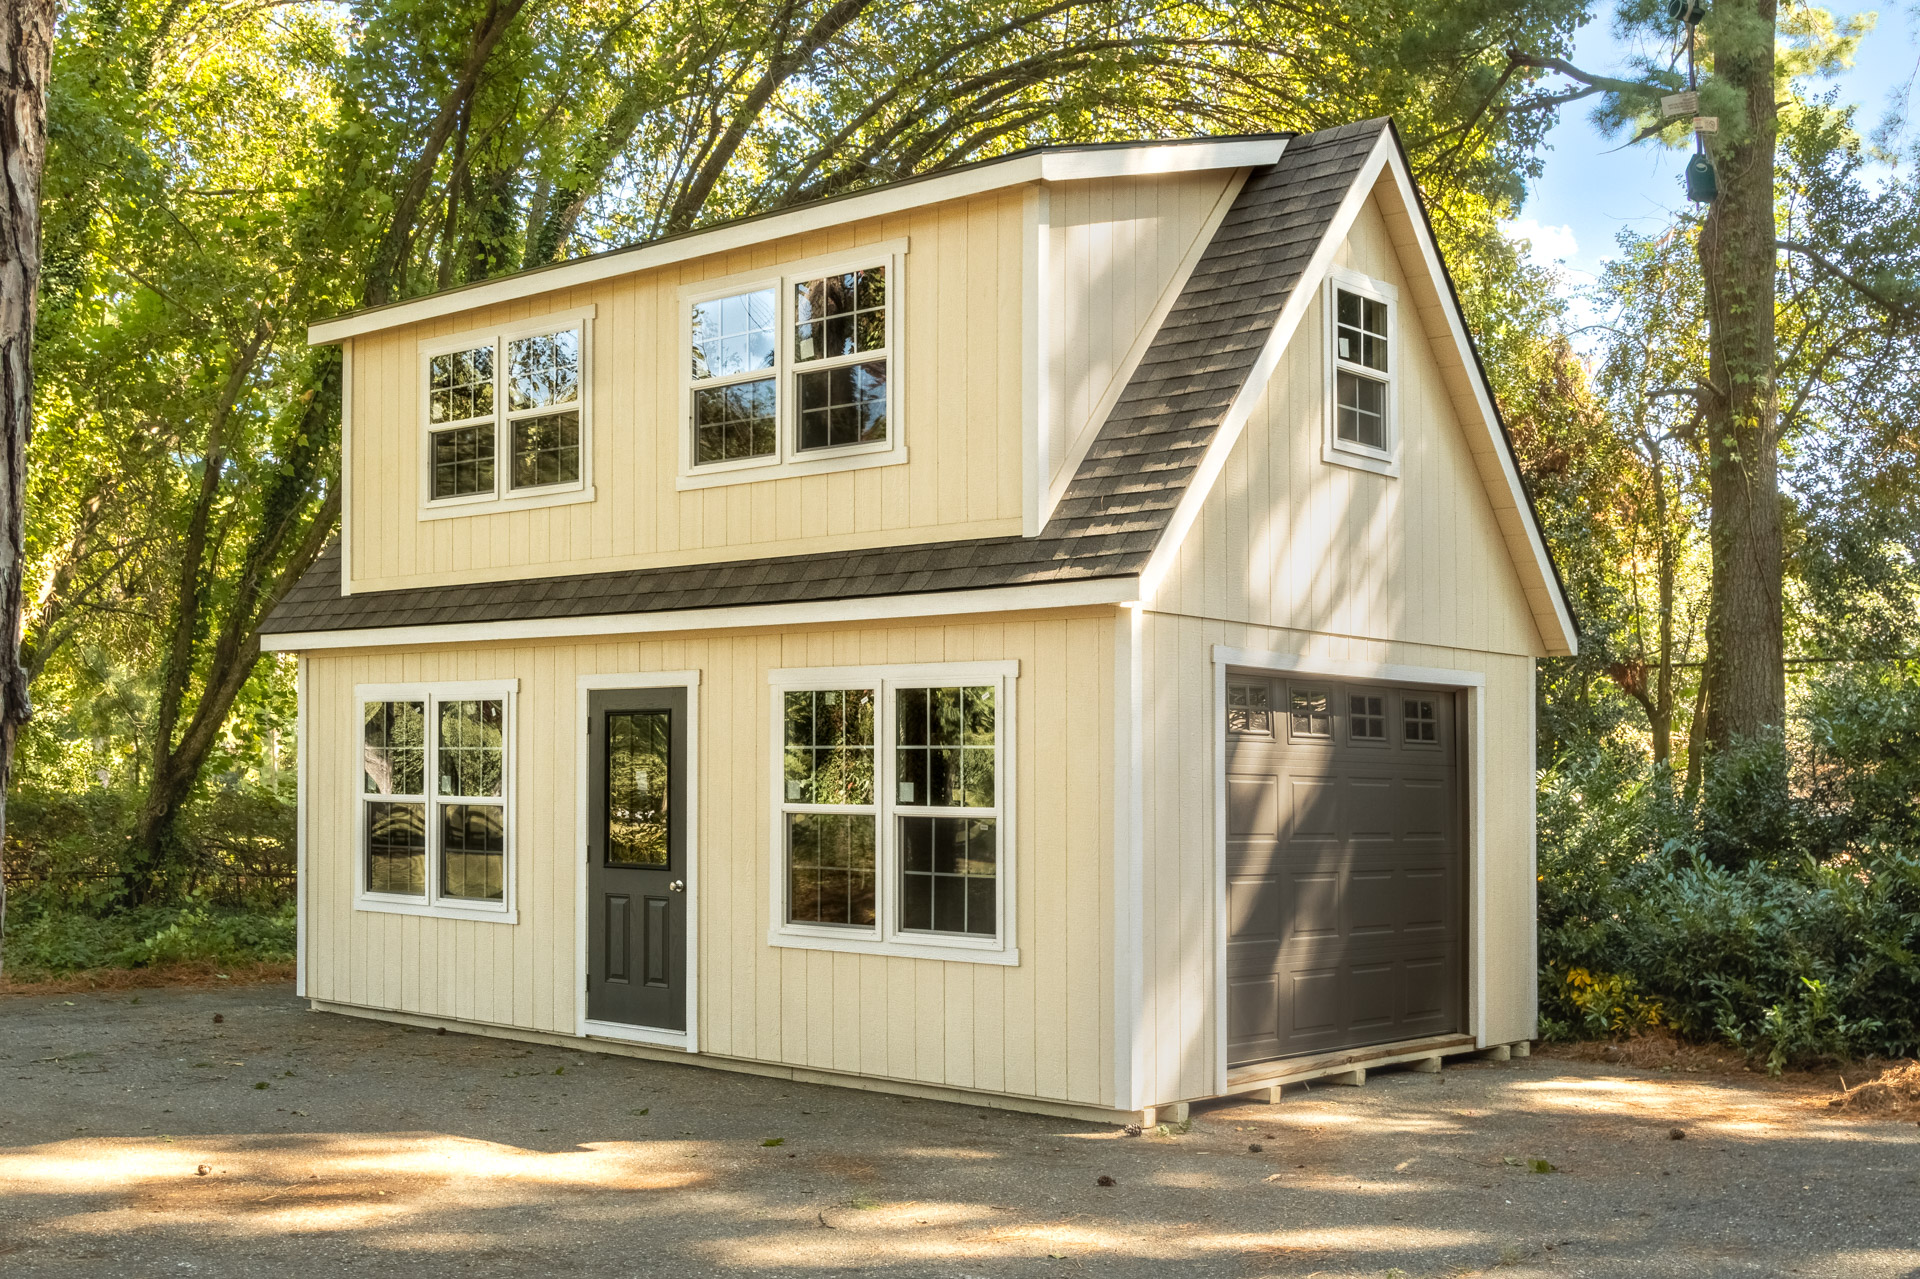 Garages for Sale in Maine